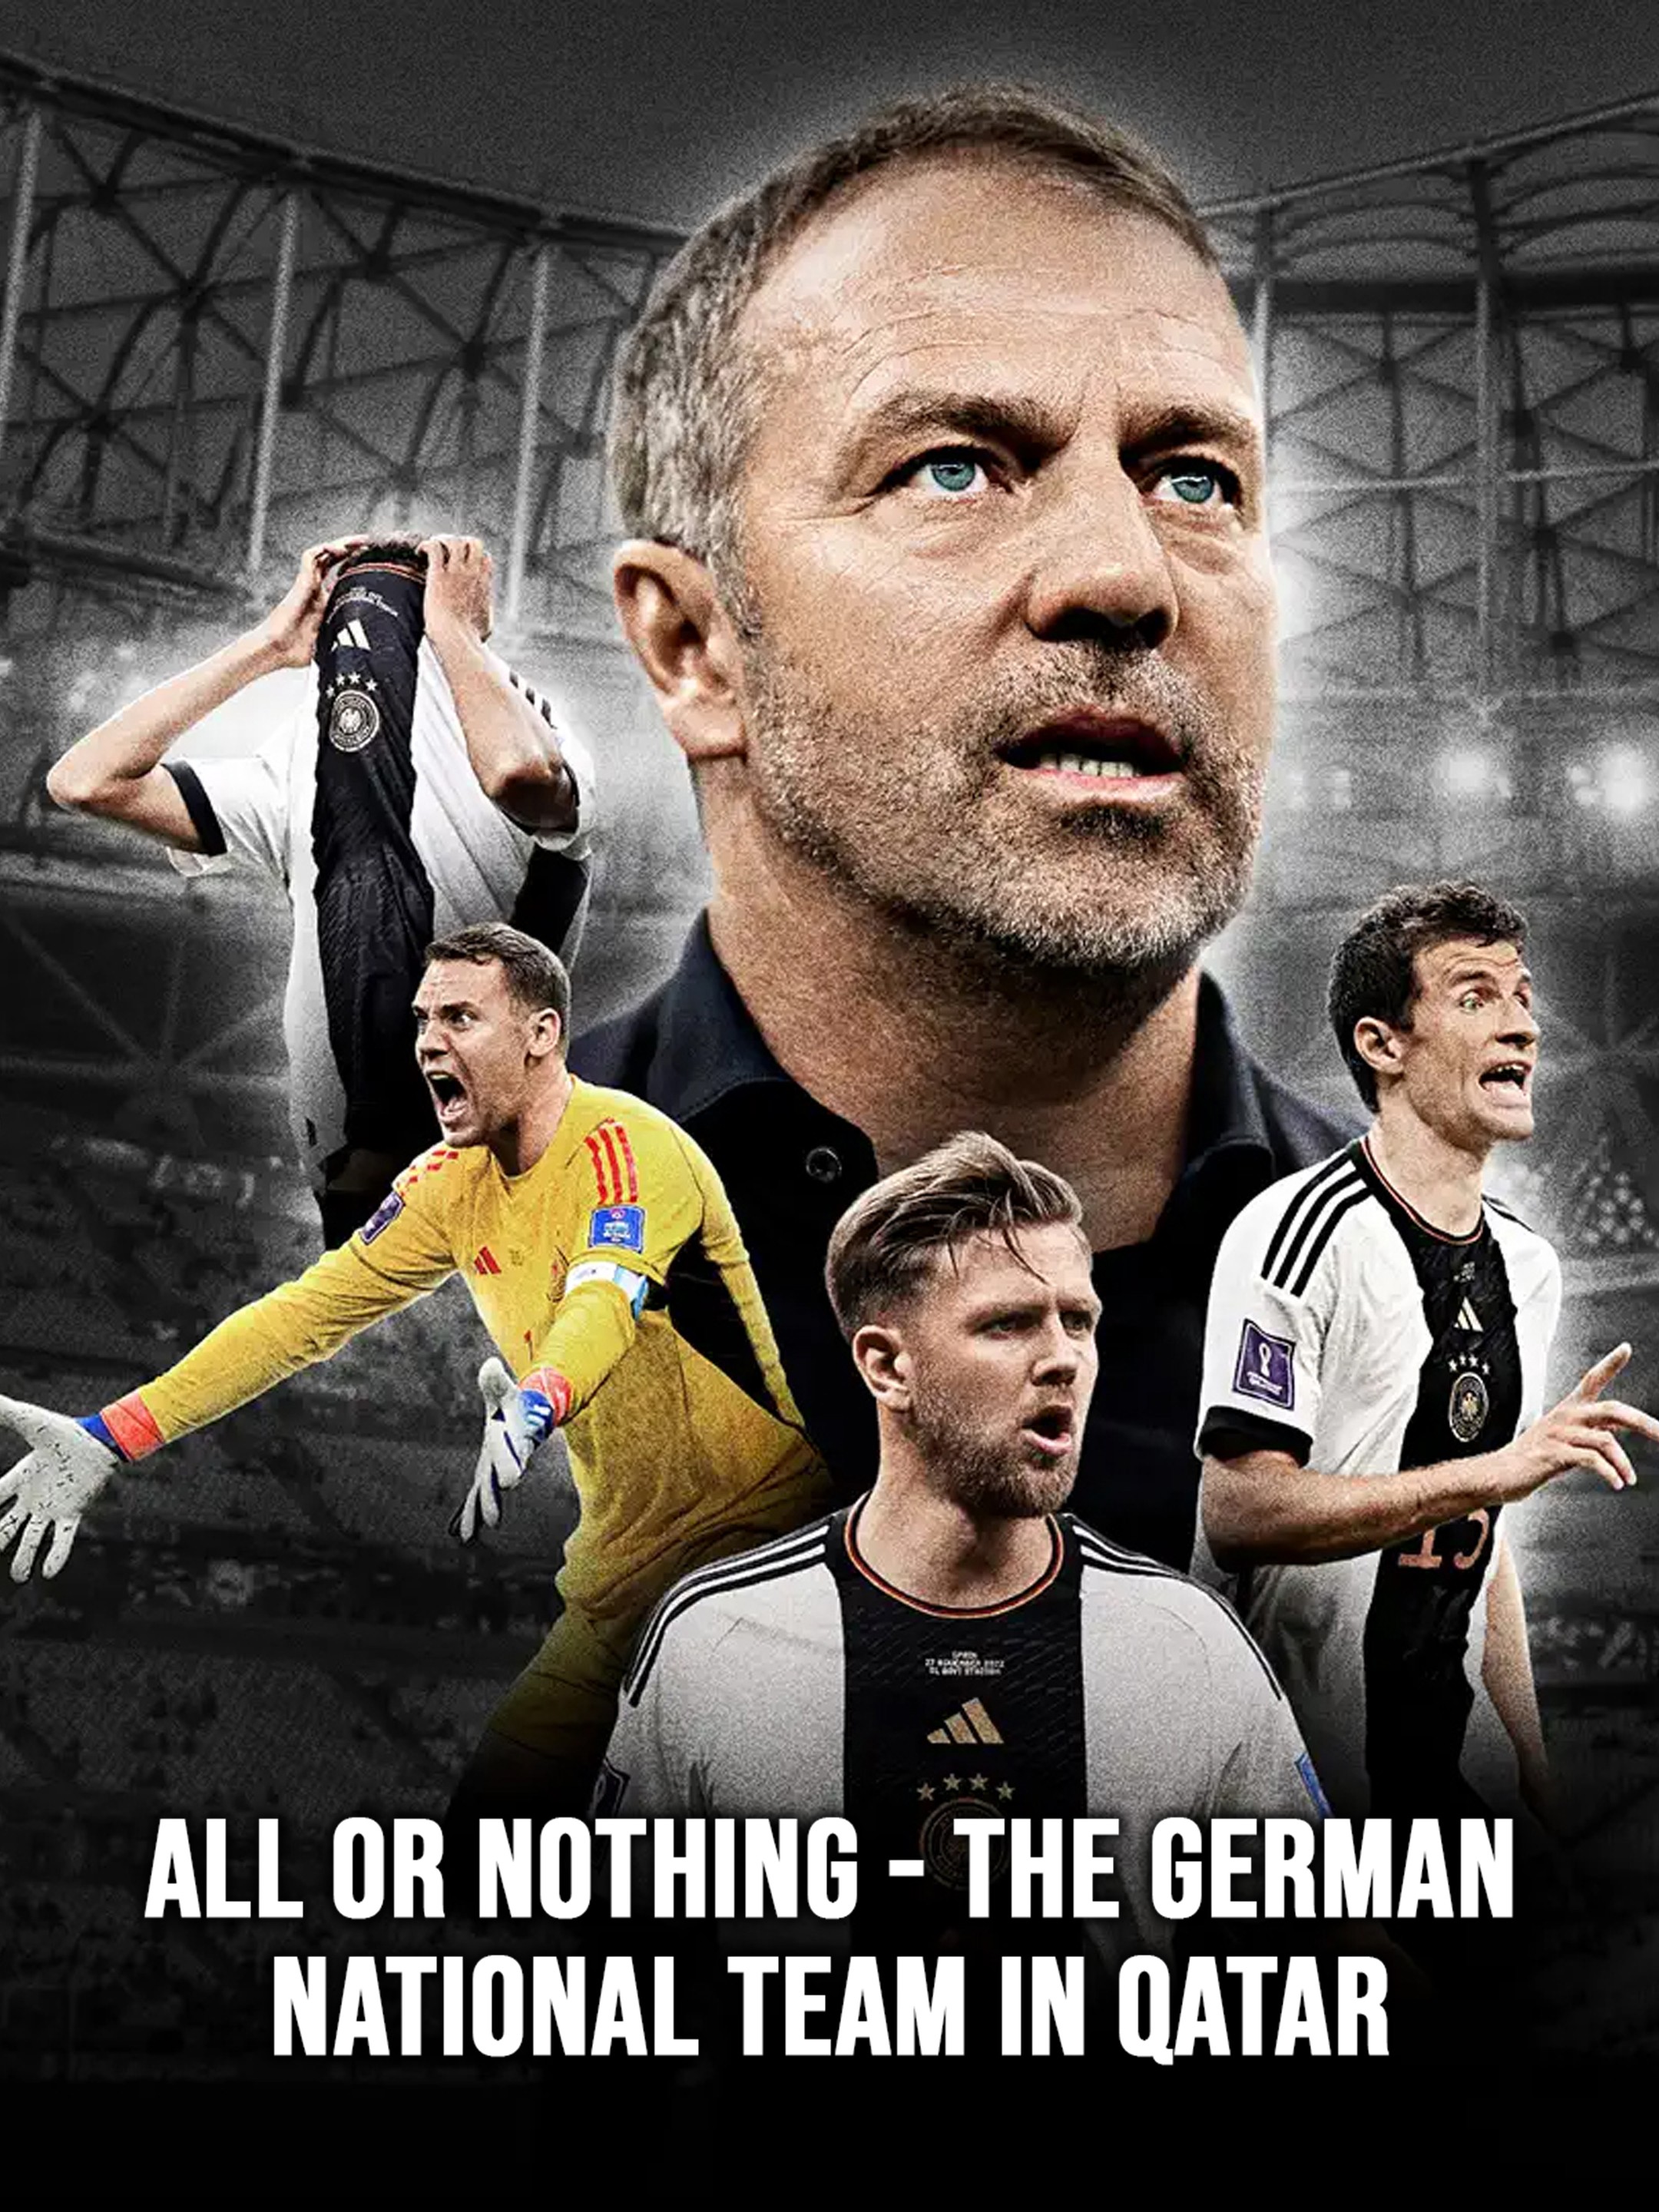 All or nothing - The German national team in Qatar Season 1